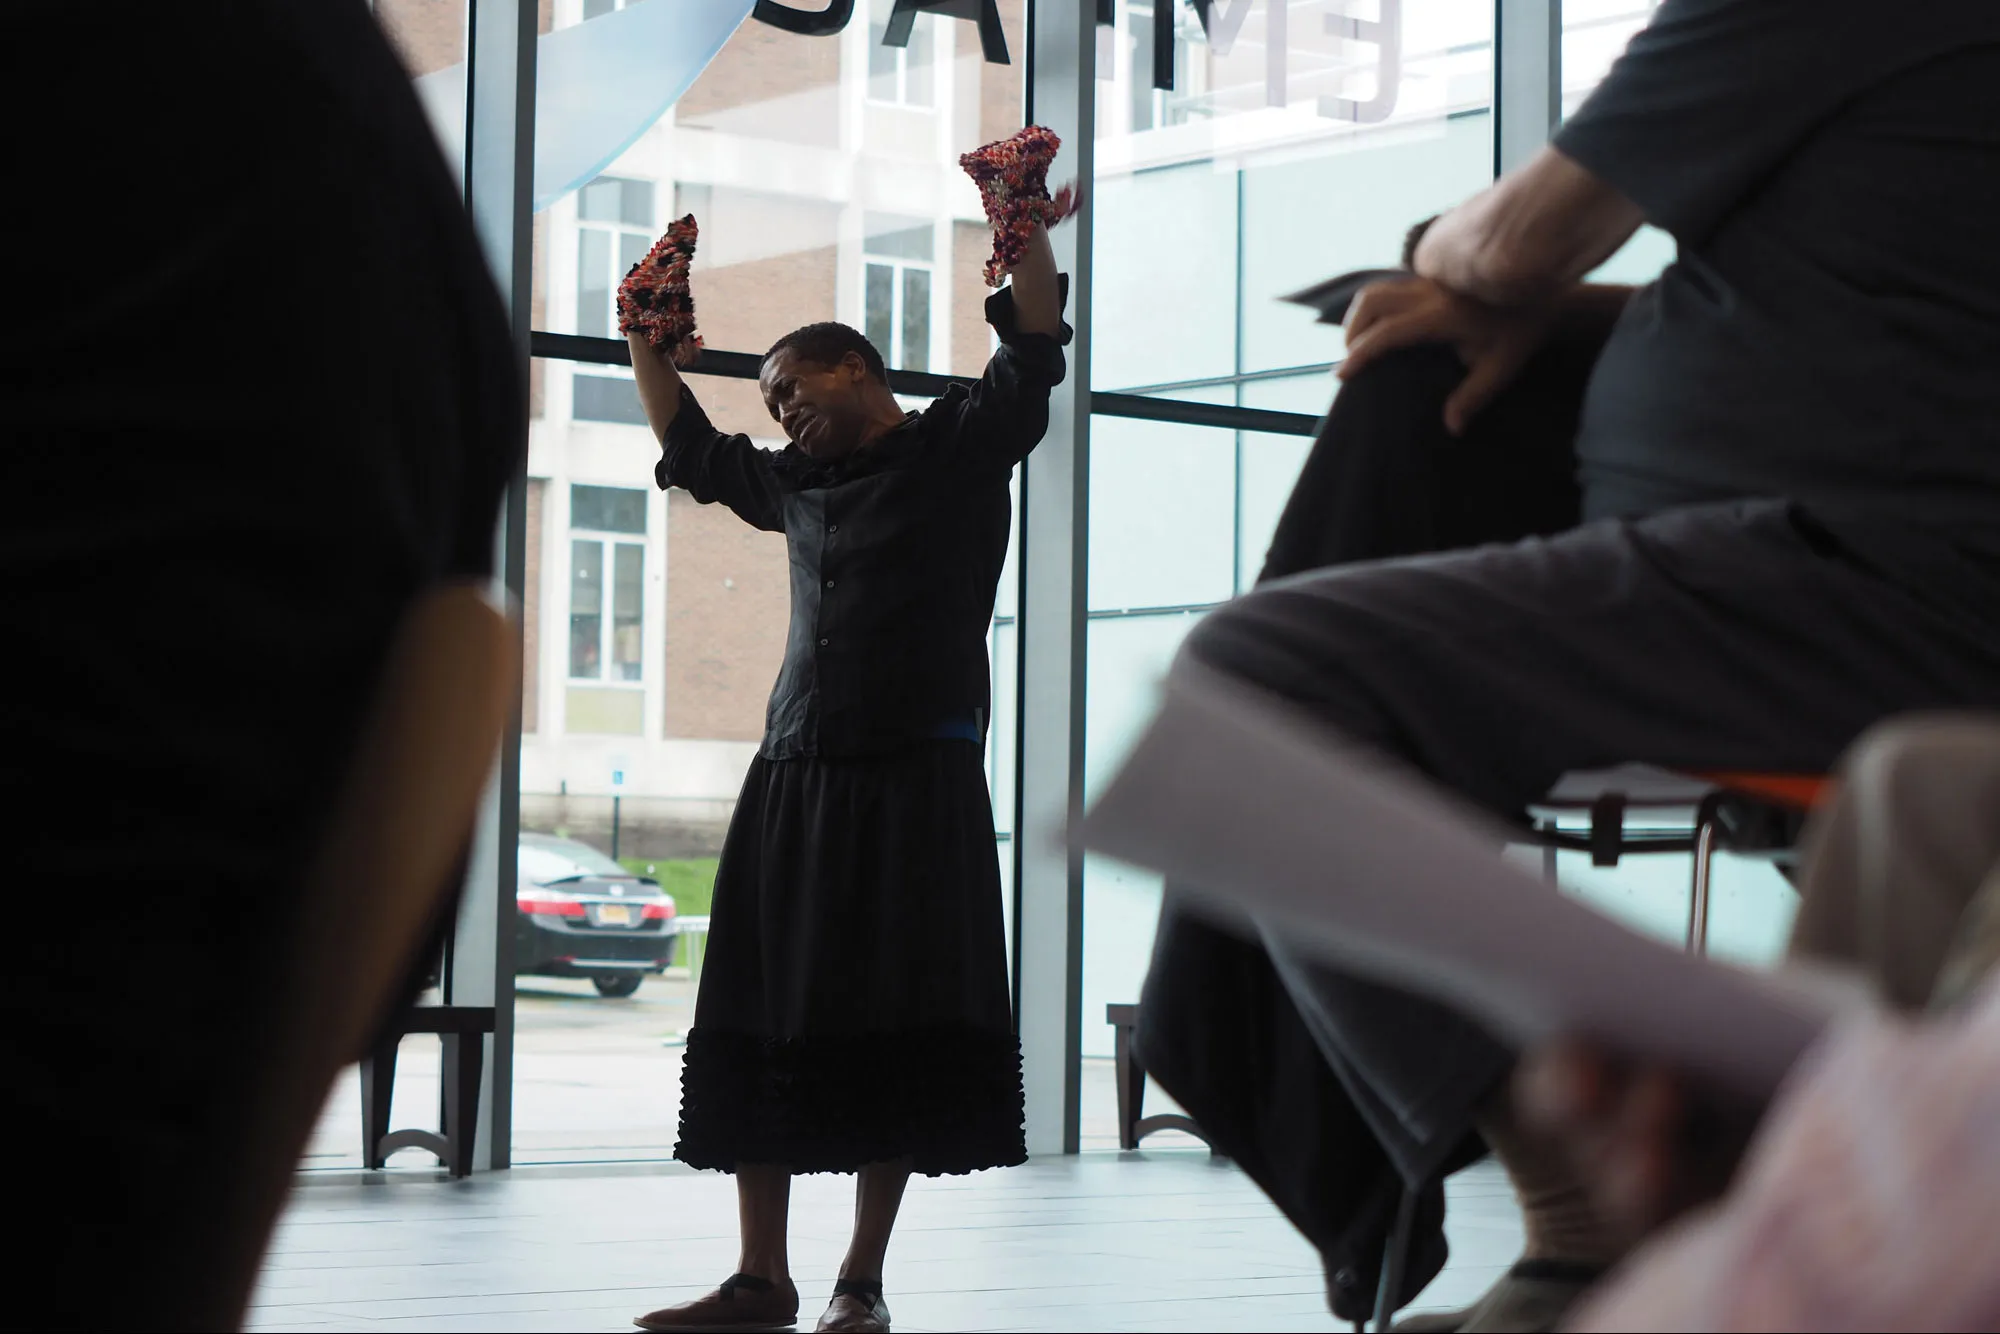 Trajal Harrell wearing a black dress performing with hands up in a light filled lobby. 